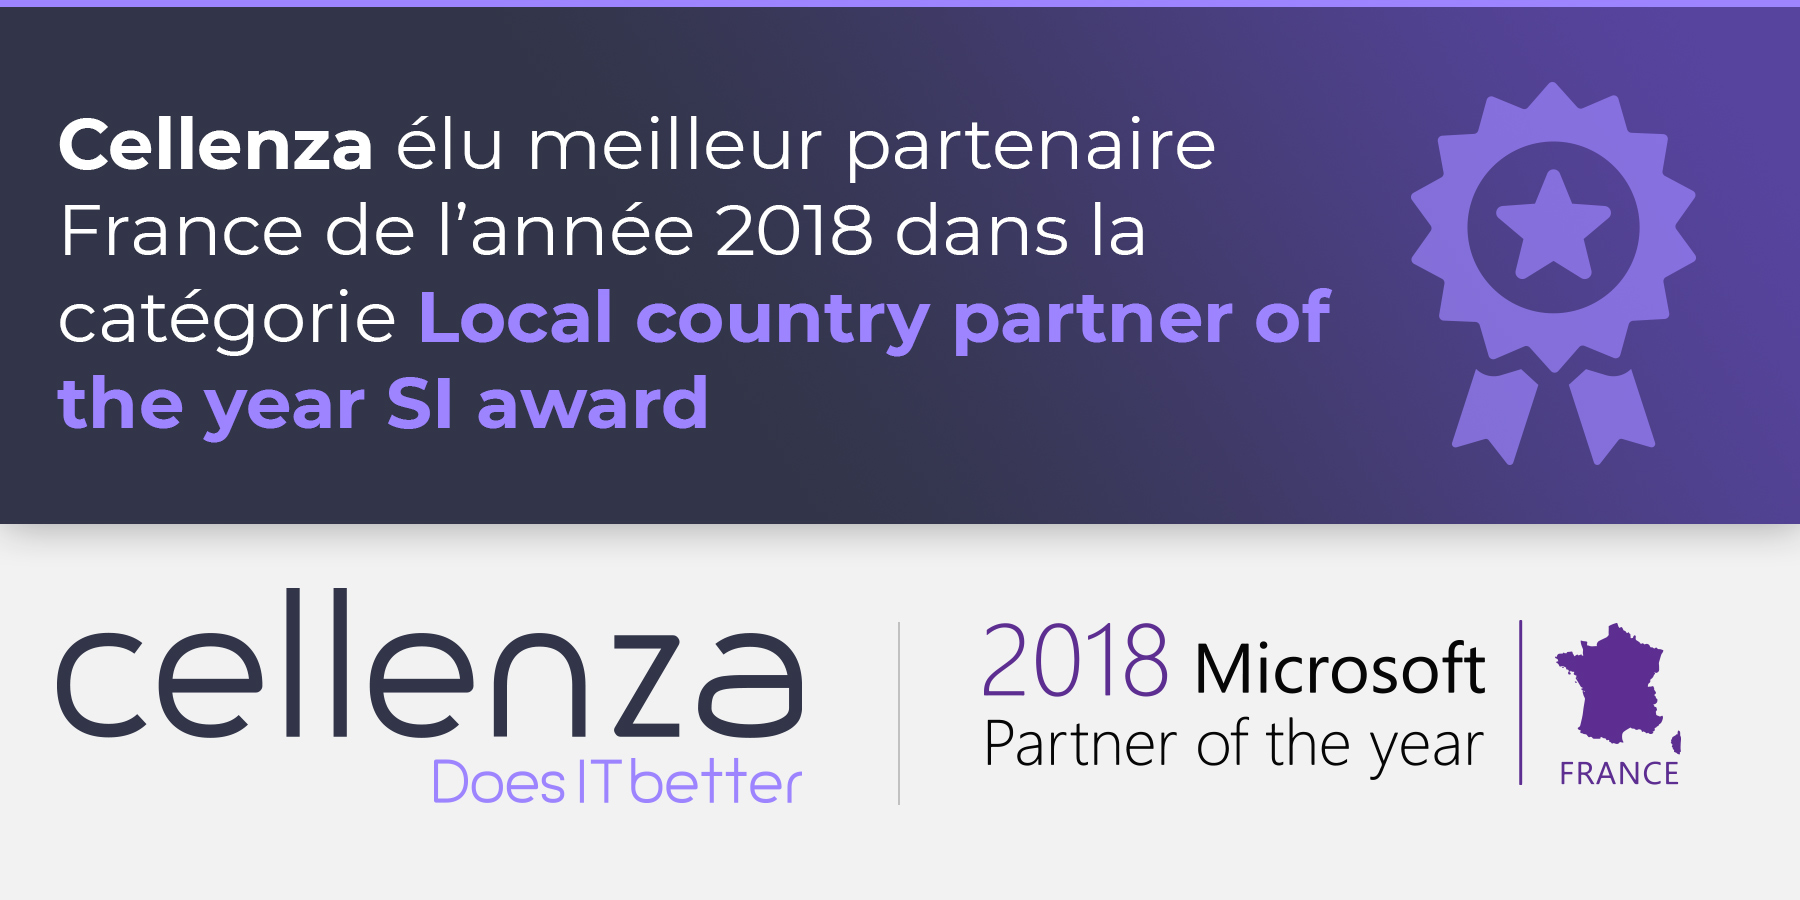 Cellenza Partner of the Year 2018 Microsft